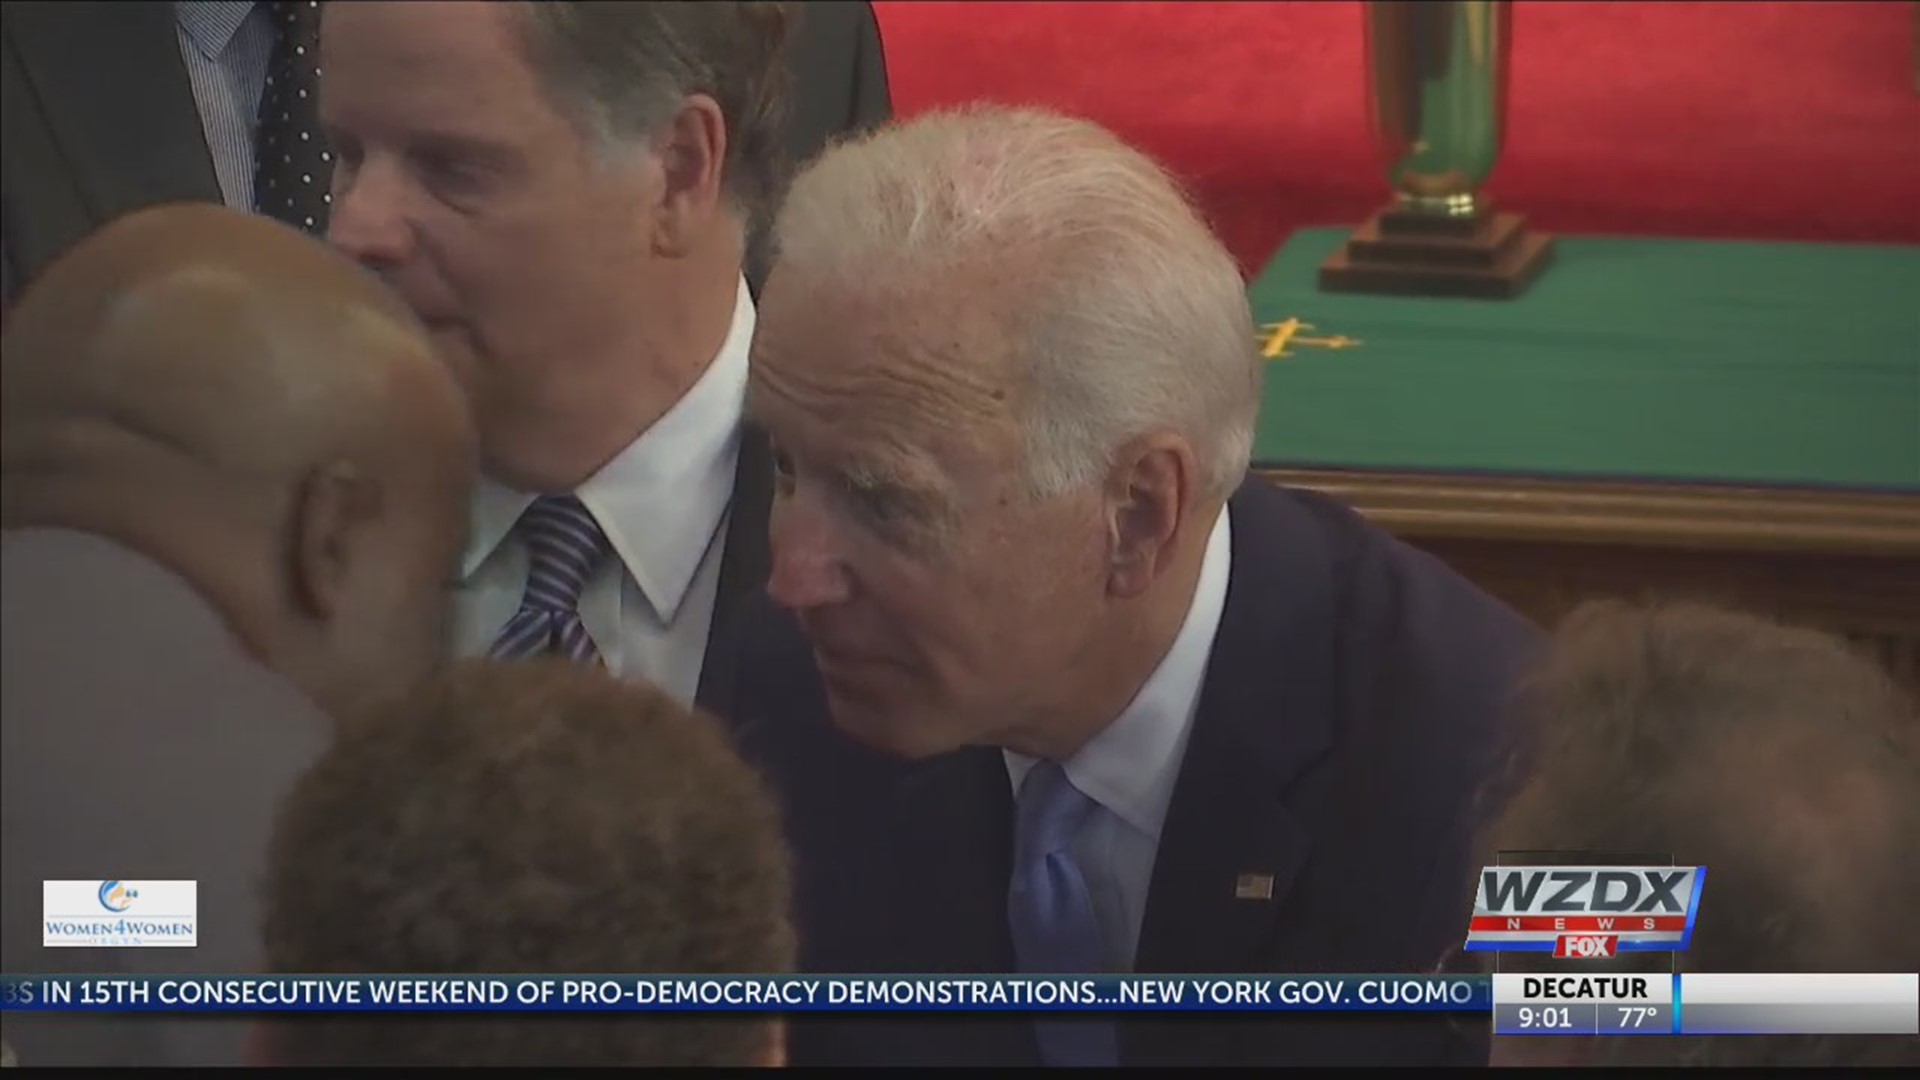 Democratic candidate and former Vice President Joe Biden made a stop in Birmingham Sunday, September 15. Biden spoke at the 16th Street Baptist Church were 56 years since four young girls were killed in the church bombing.